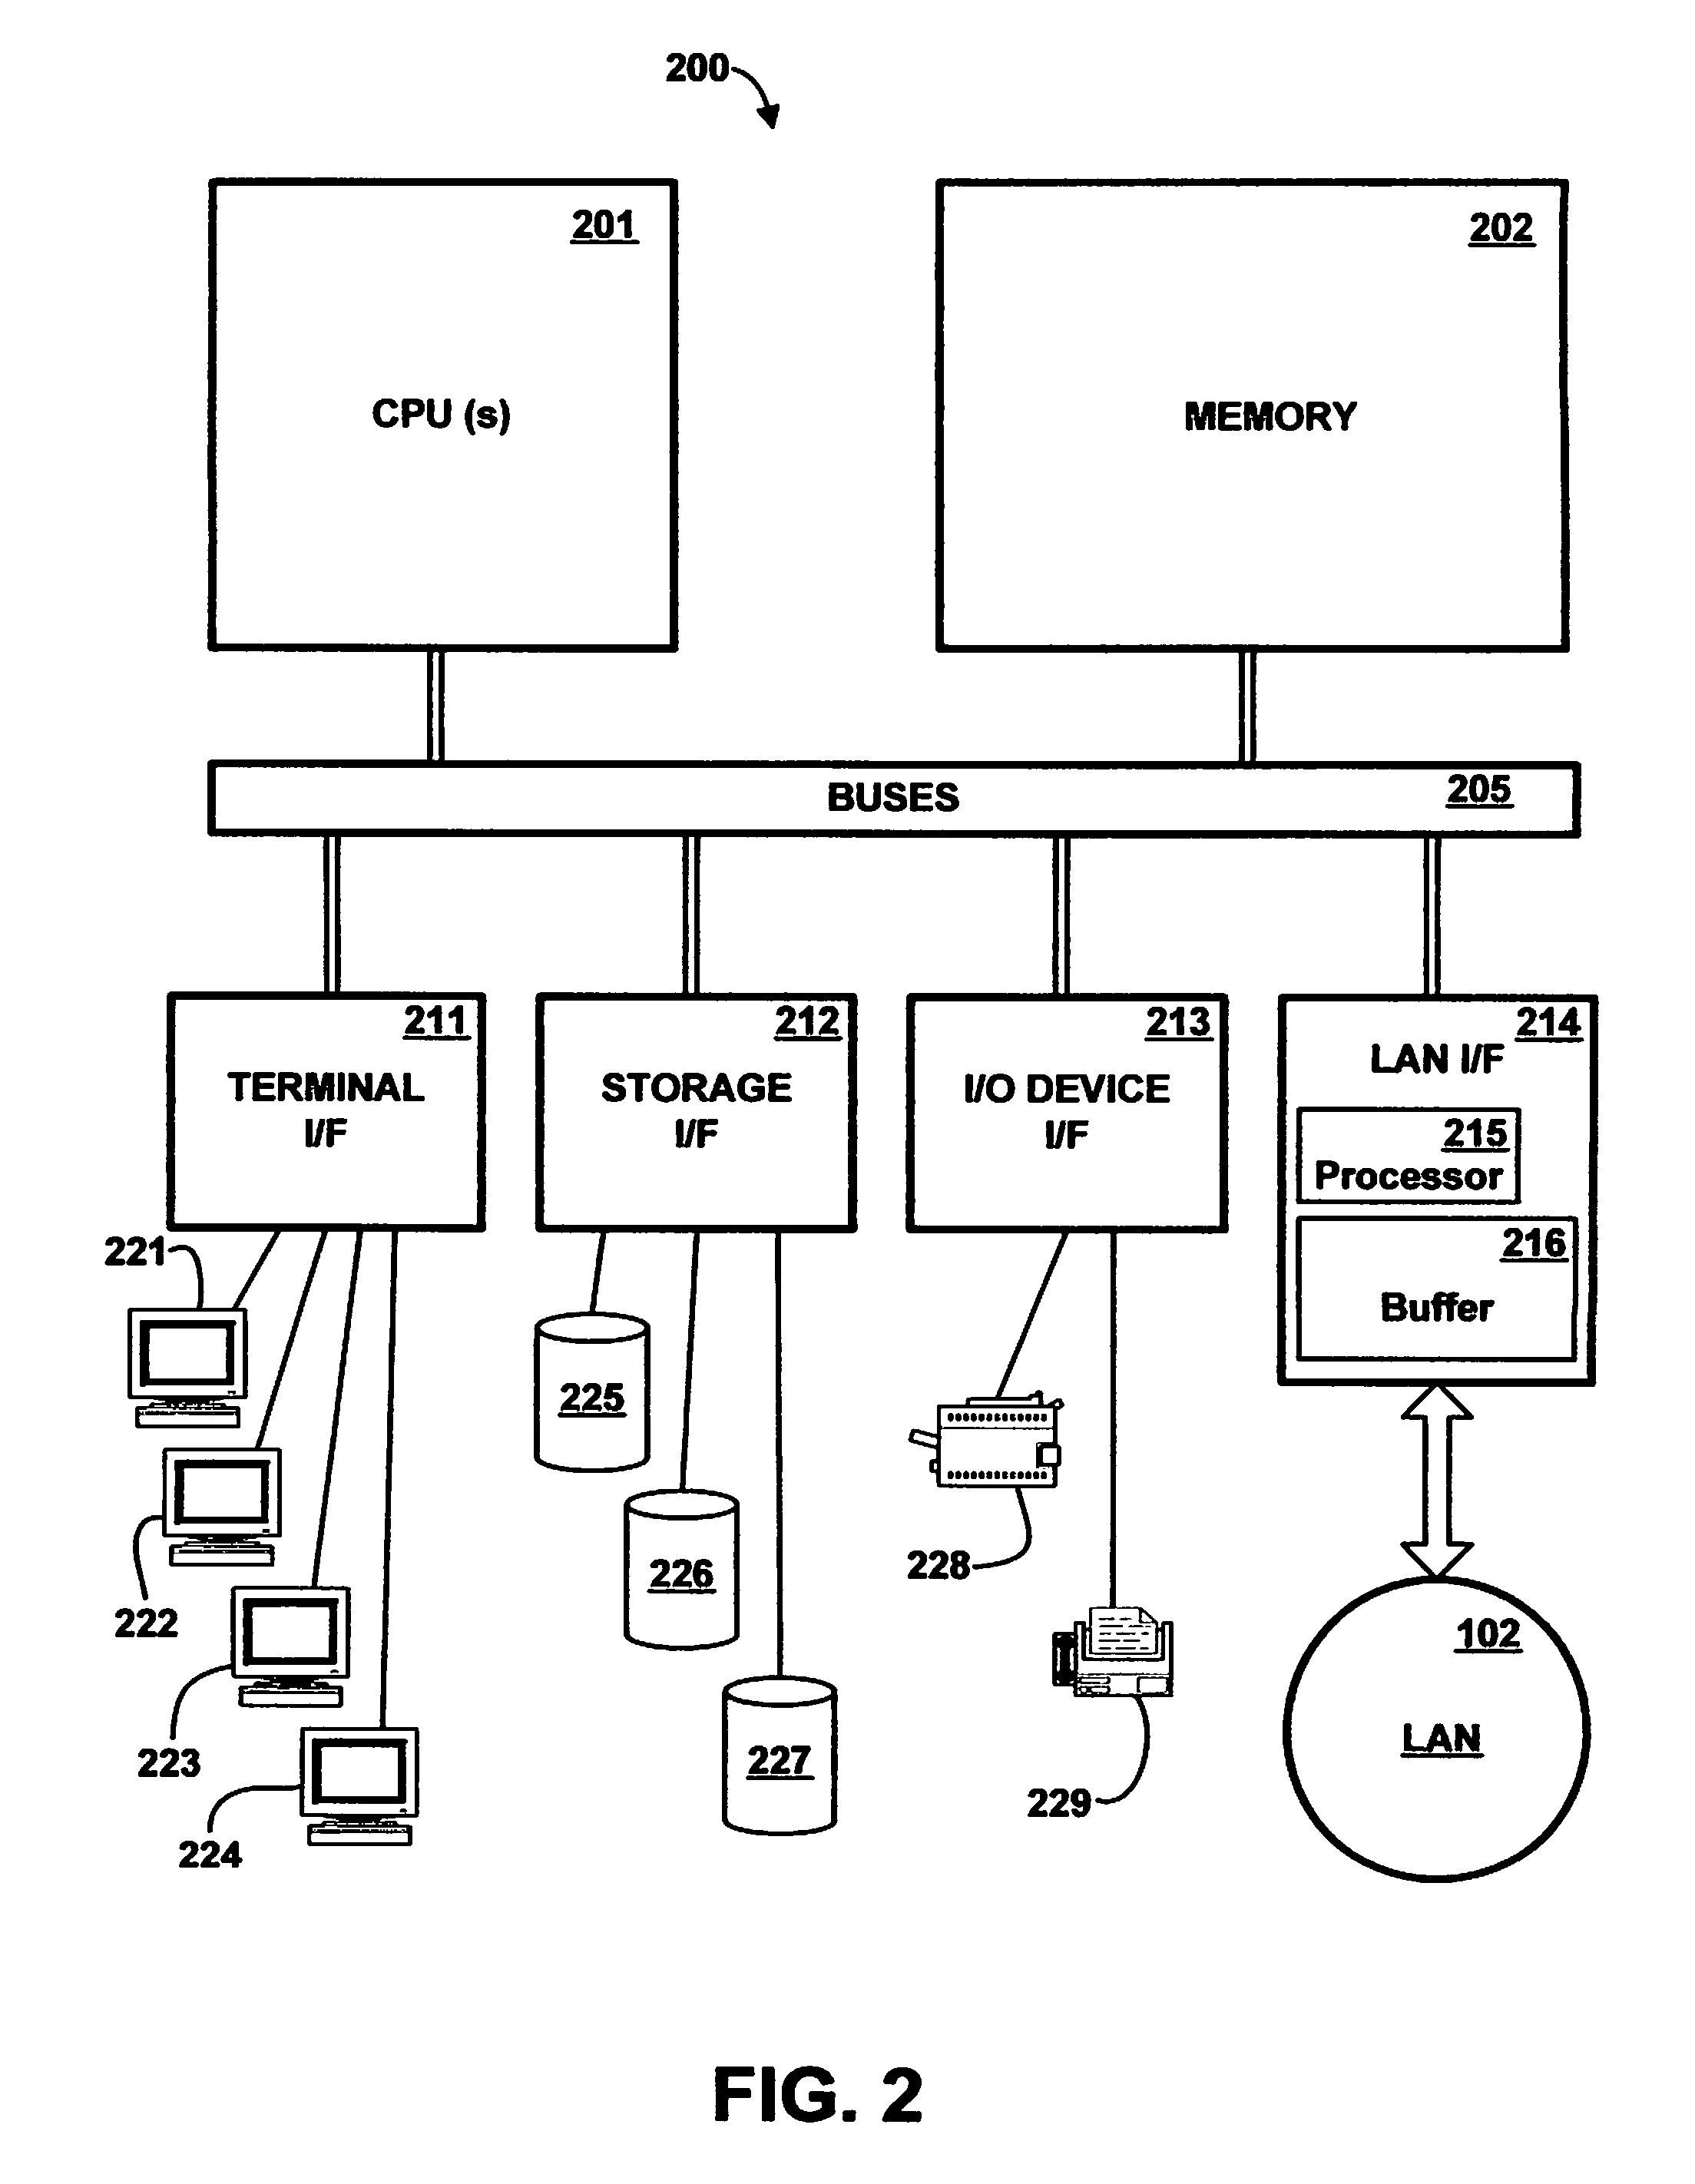 Method and Apparatus for Dynamically Adjusting the Number of Packets in a Packet Train to Avoid Timeouts